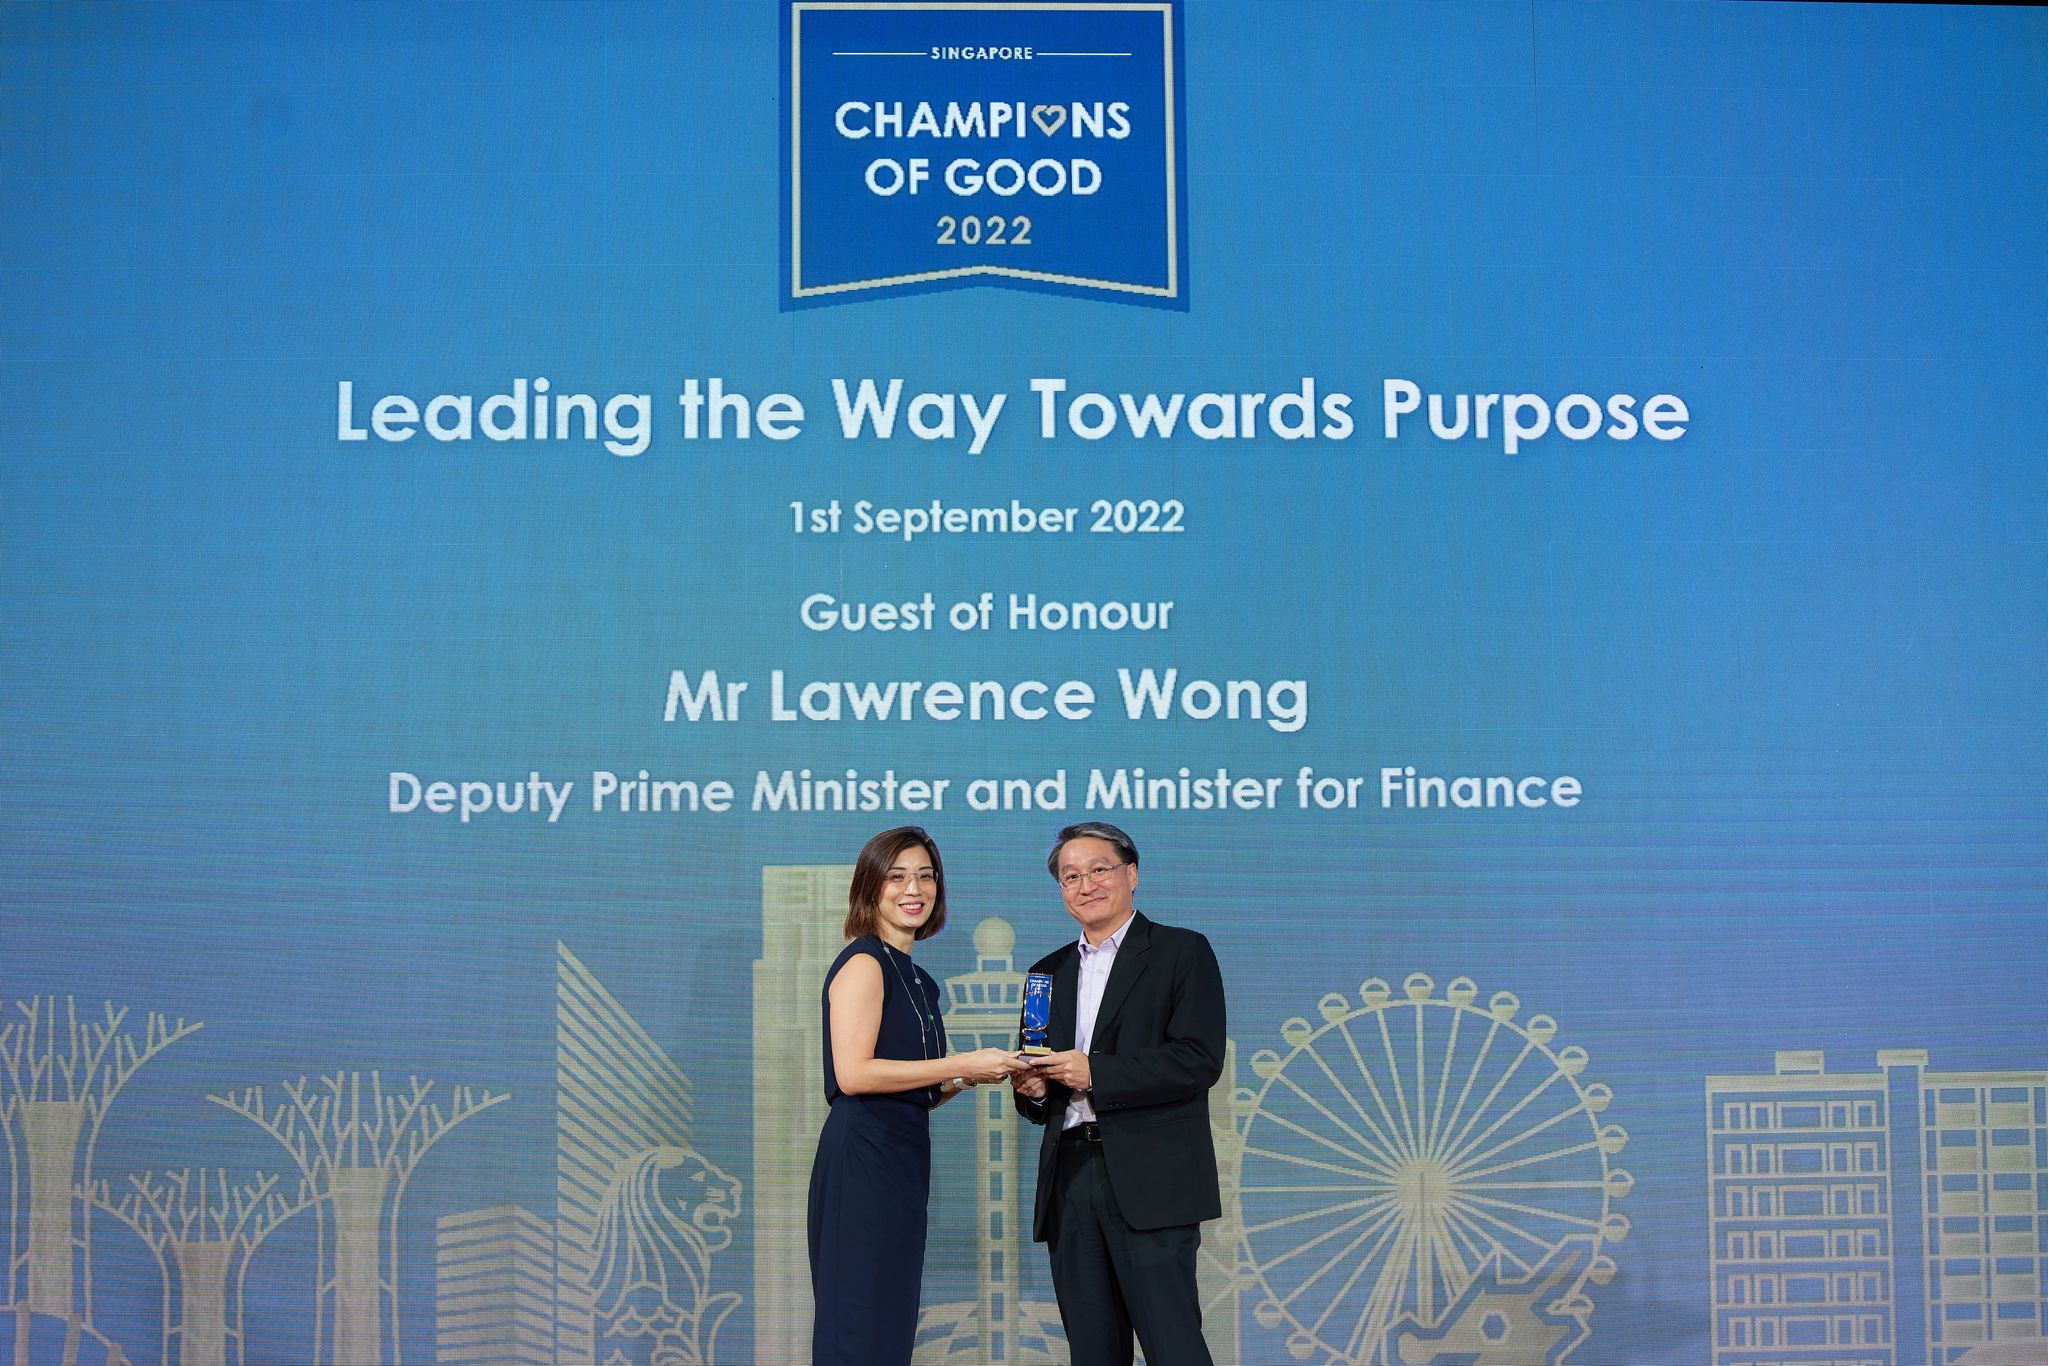 Co-head of Pro-bono practice and Senior Partner Christopher Chong receiving the conferment award from Ms Chong Ee Rong, Vice Chairman of National Volunteer & Philanthropy Centre (NVPC)